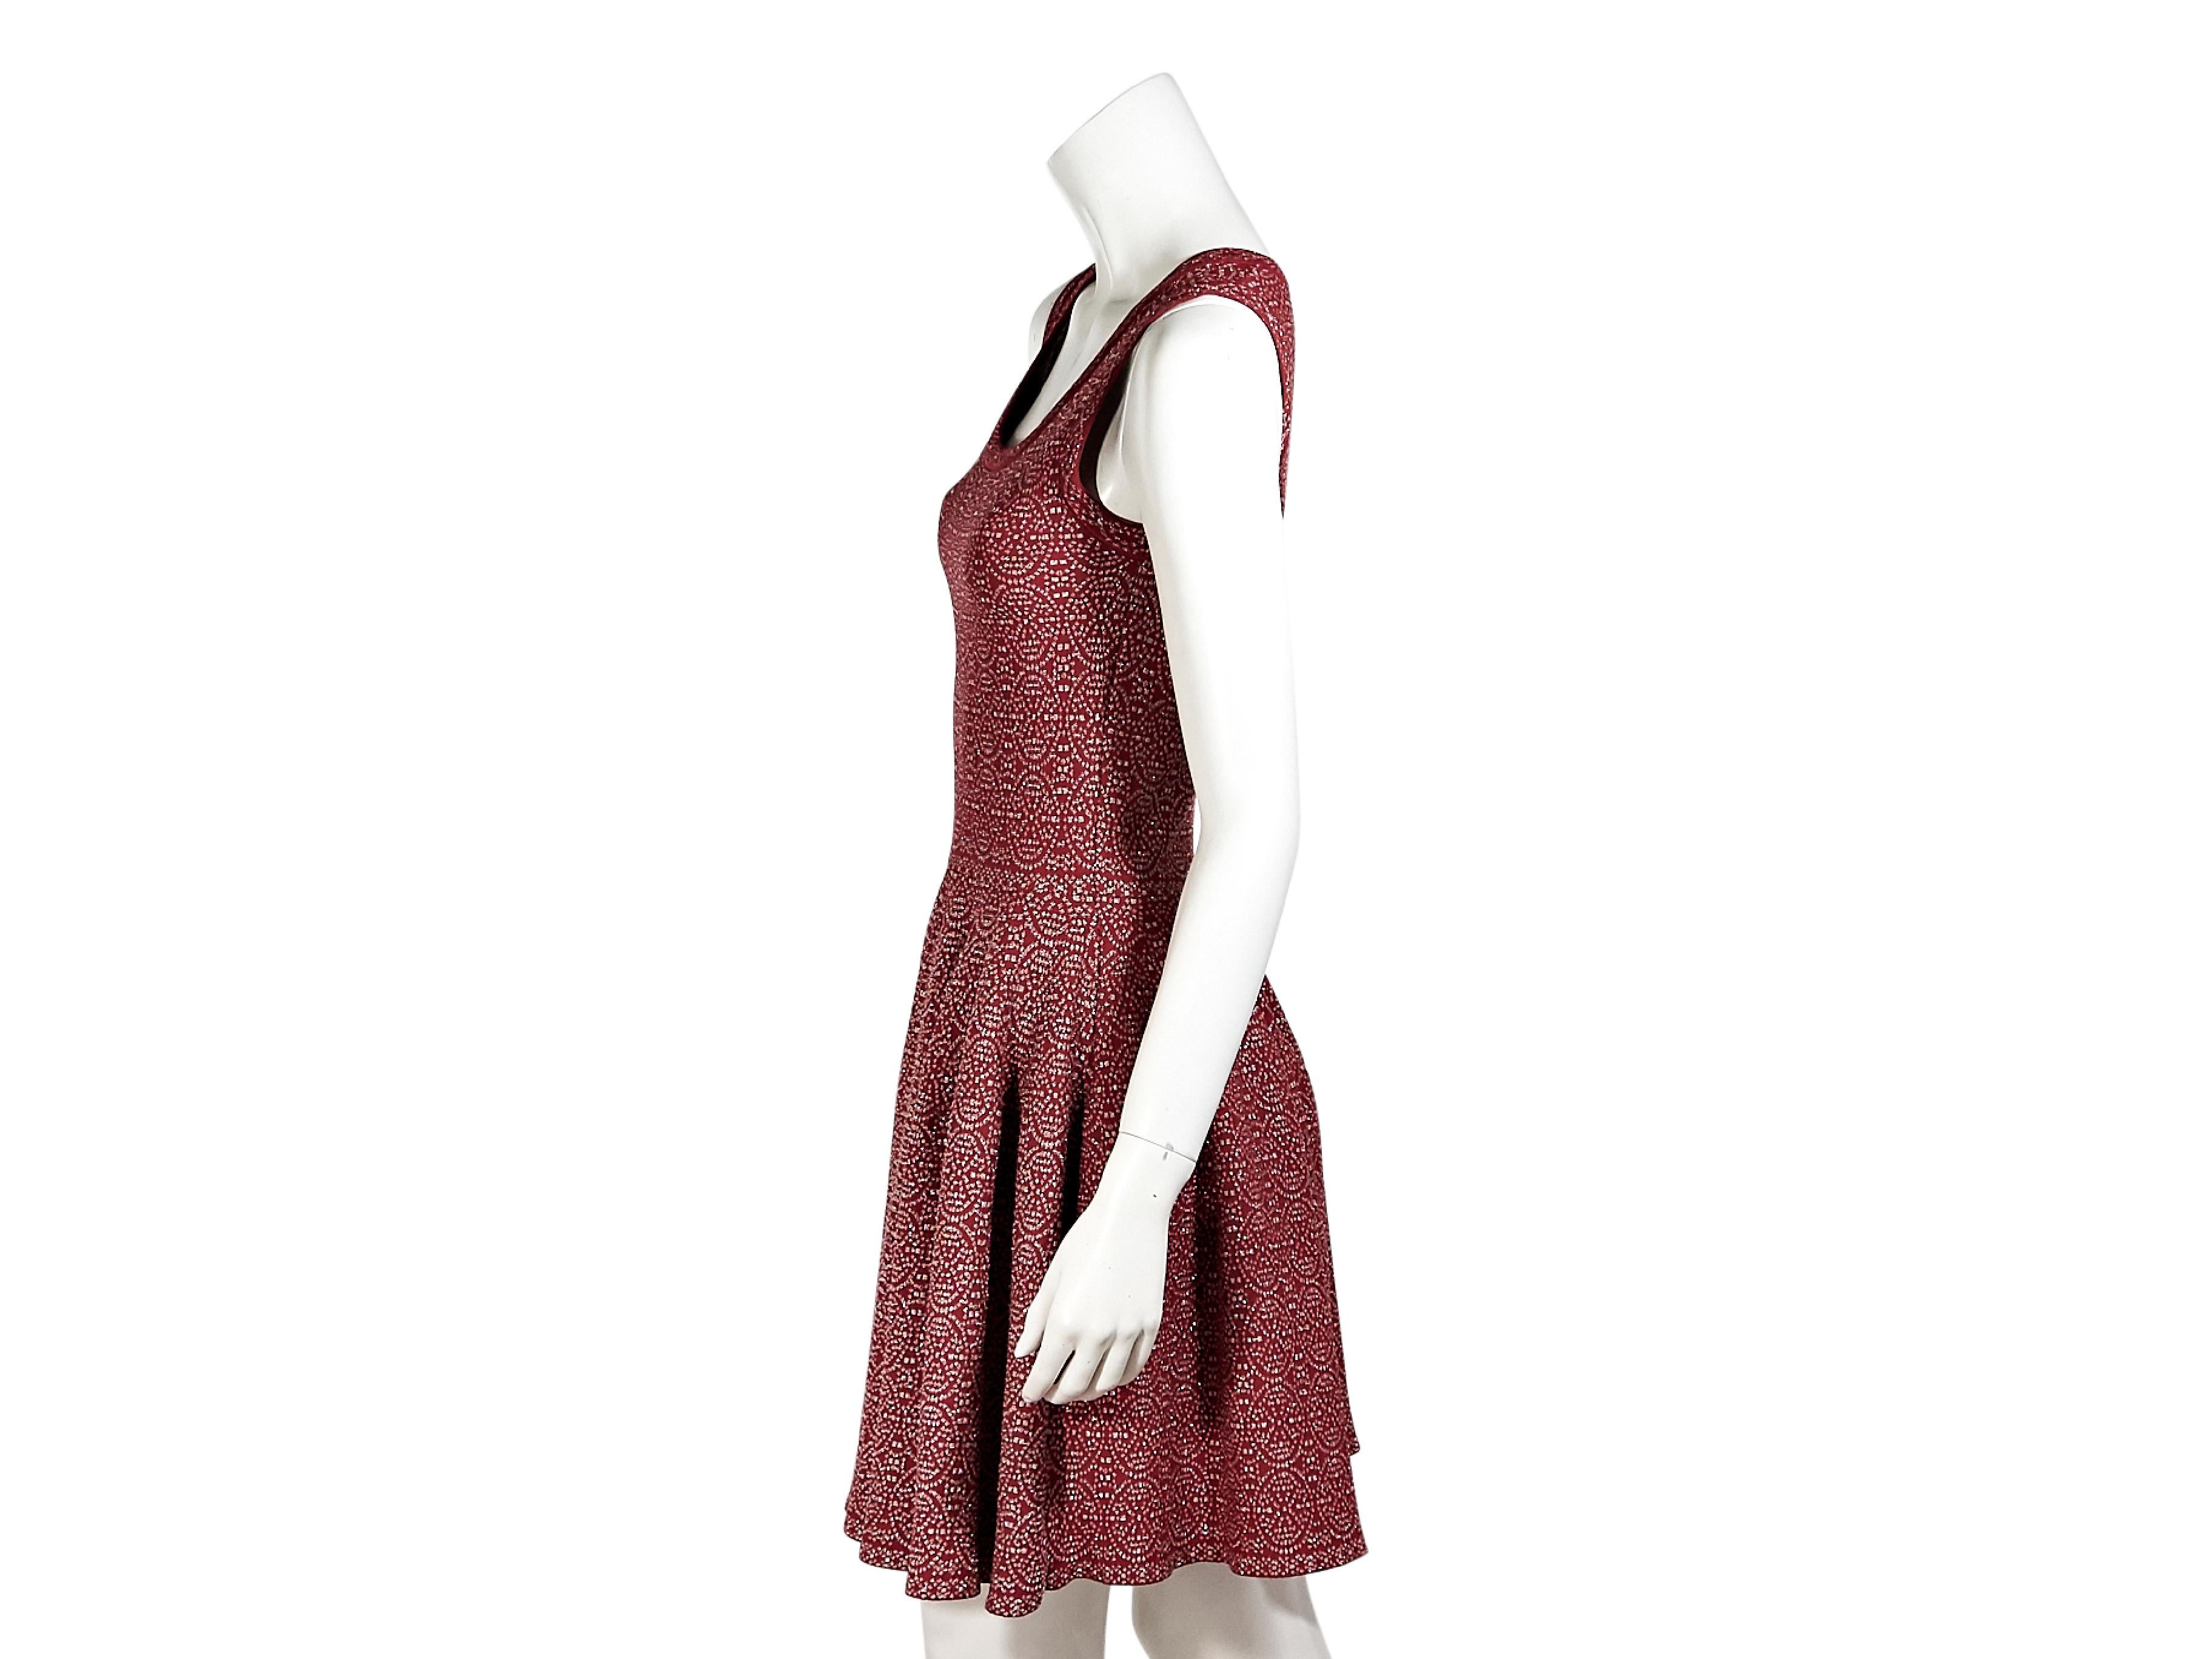 Product details:  Red and silver printed spandex fit-and-flare dress by Alaia.  Scoopneck.  Sleeveless.  Concealed back zip closure.  28